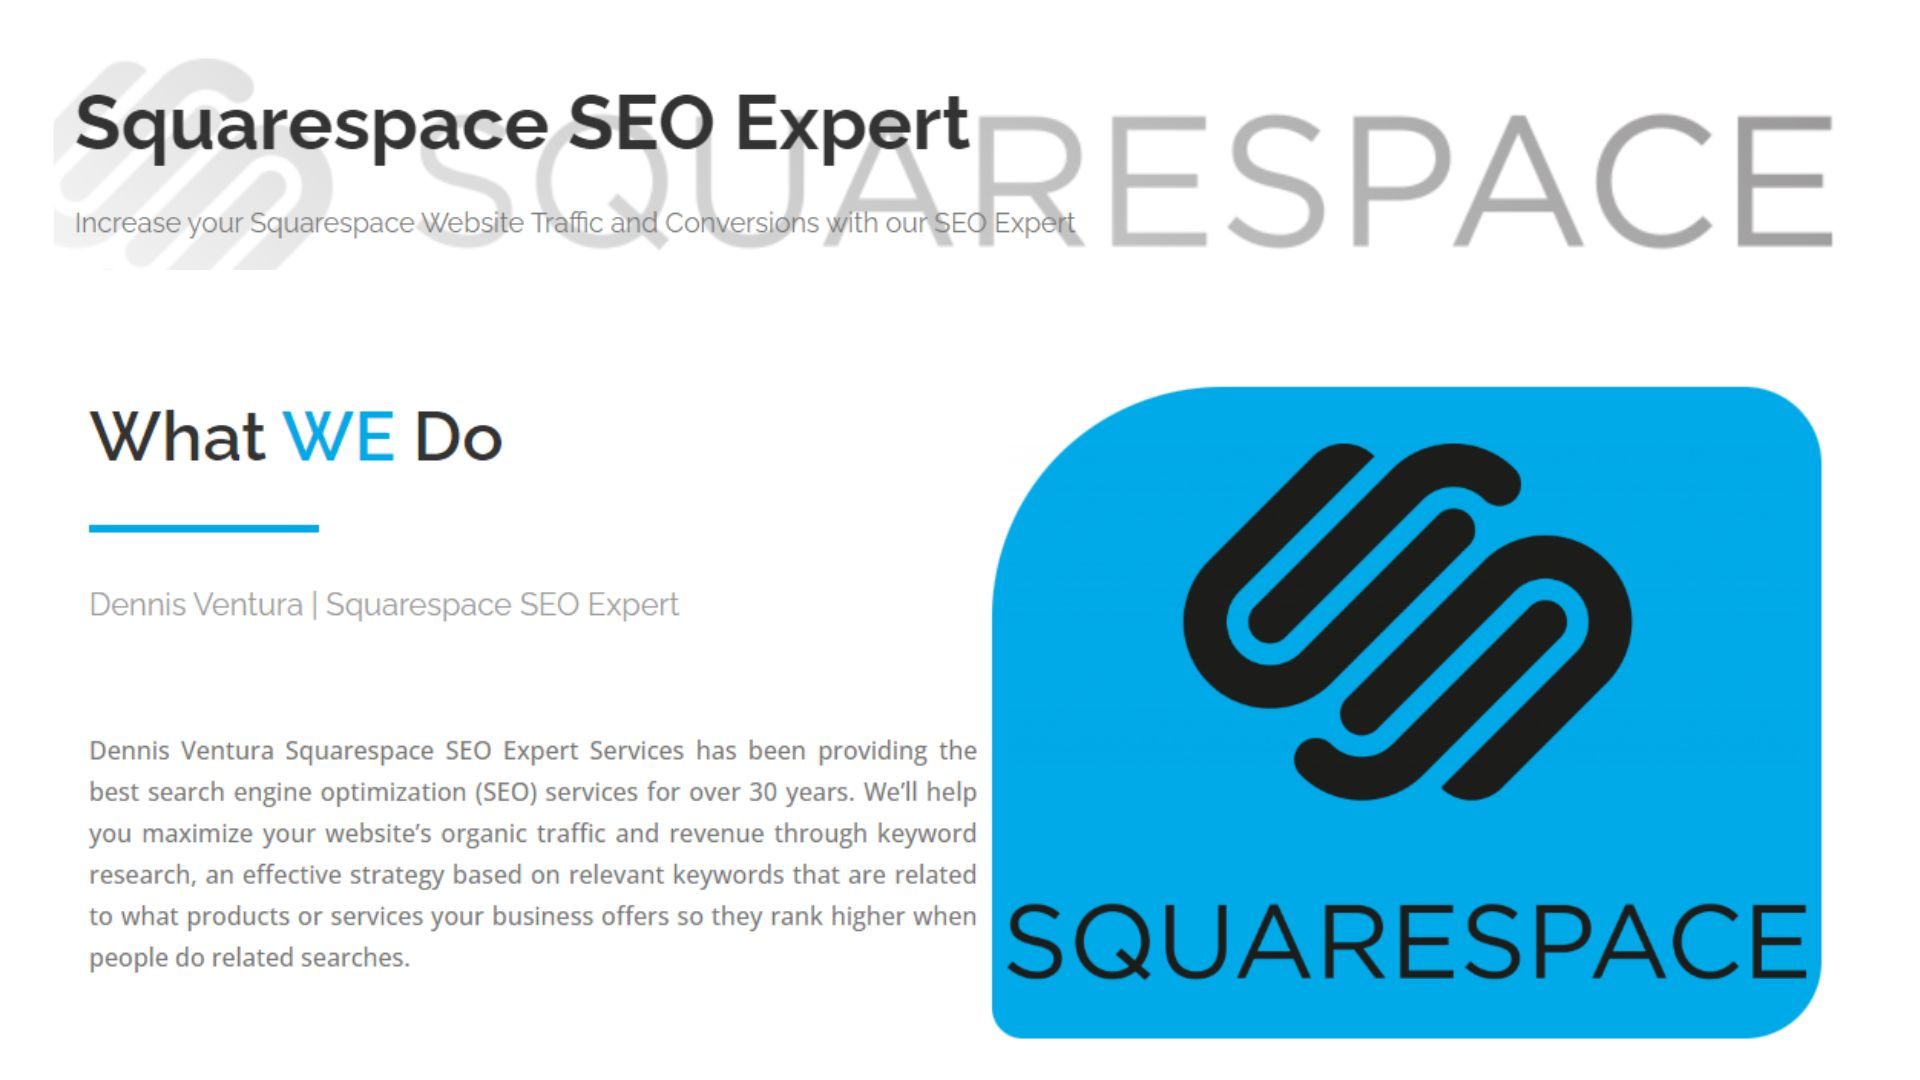 What Is Considered A Good Squarespace SEO Expert?